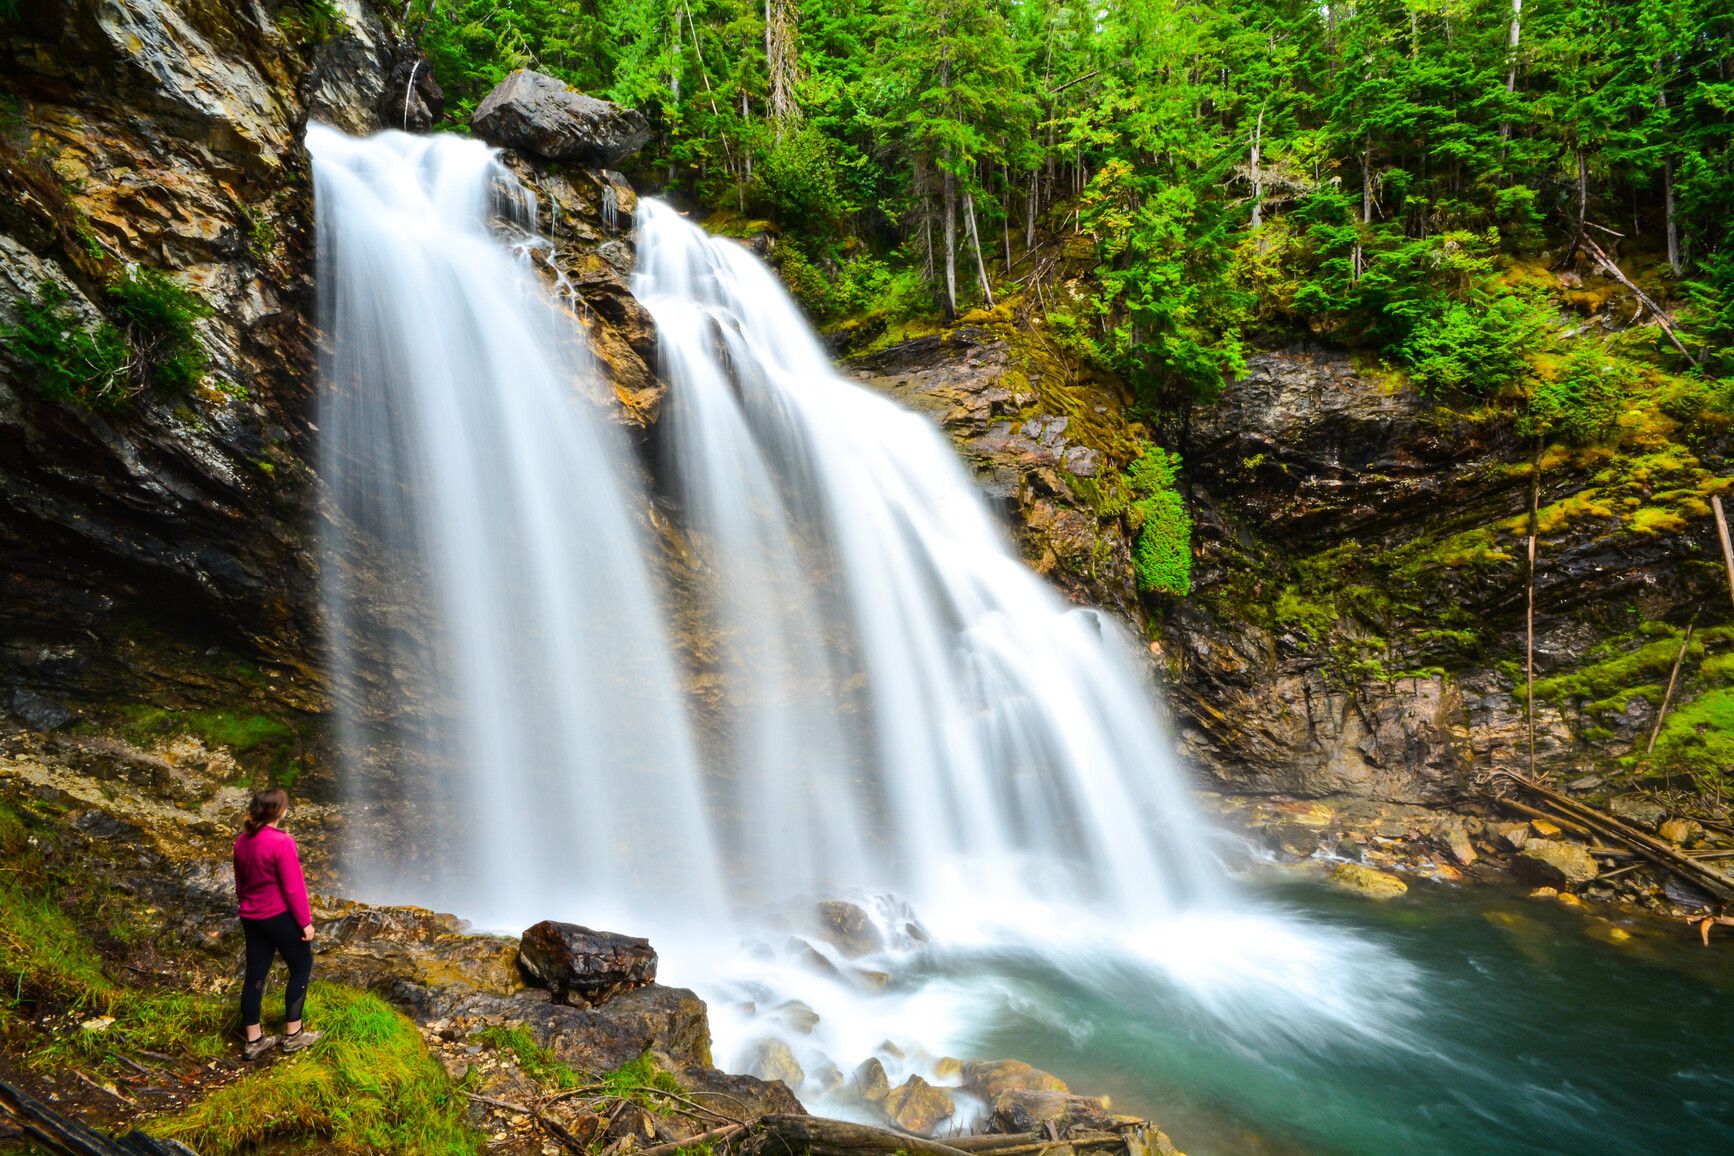 A park visitor takes in the scenic view from the base of Rainbow Falls, Monashee Park.